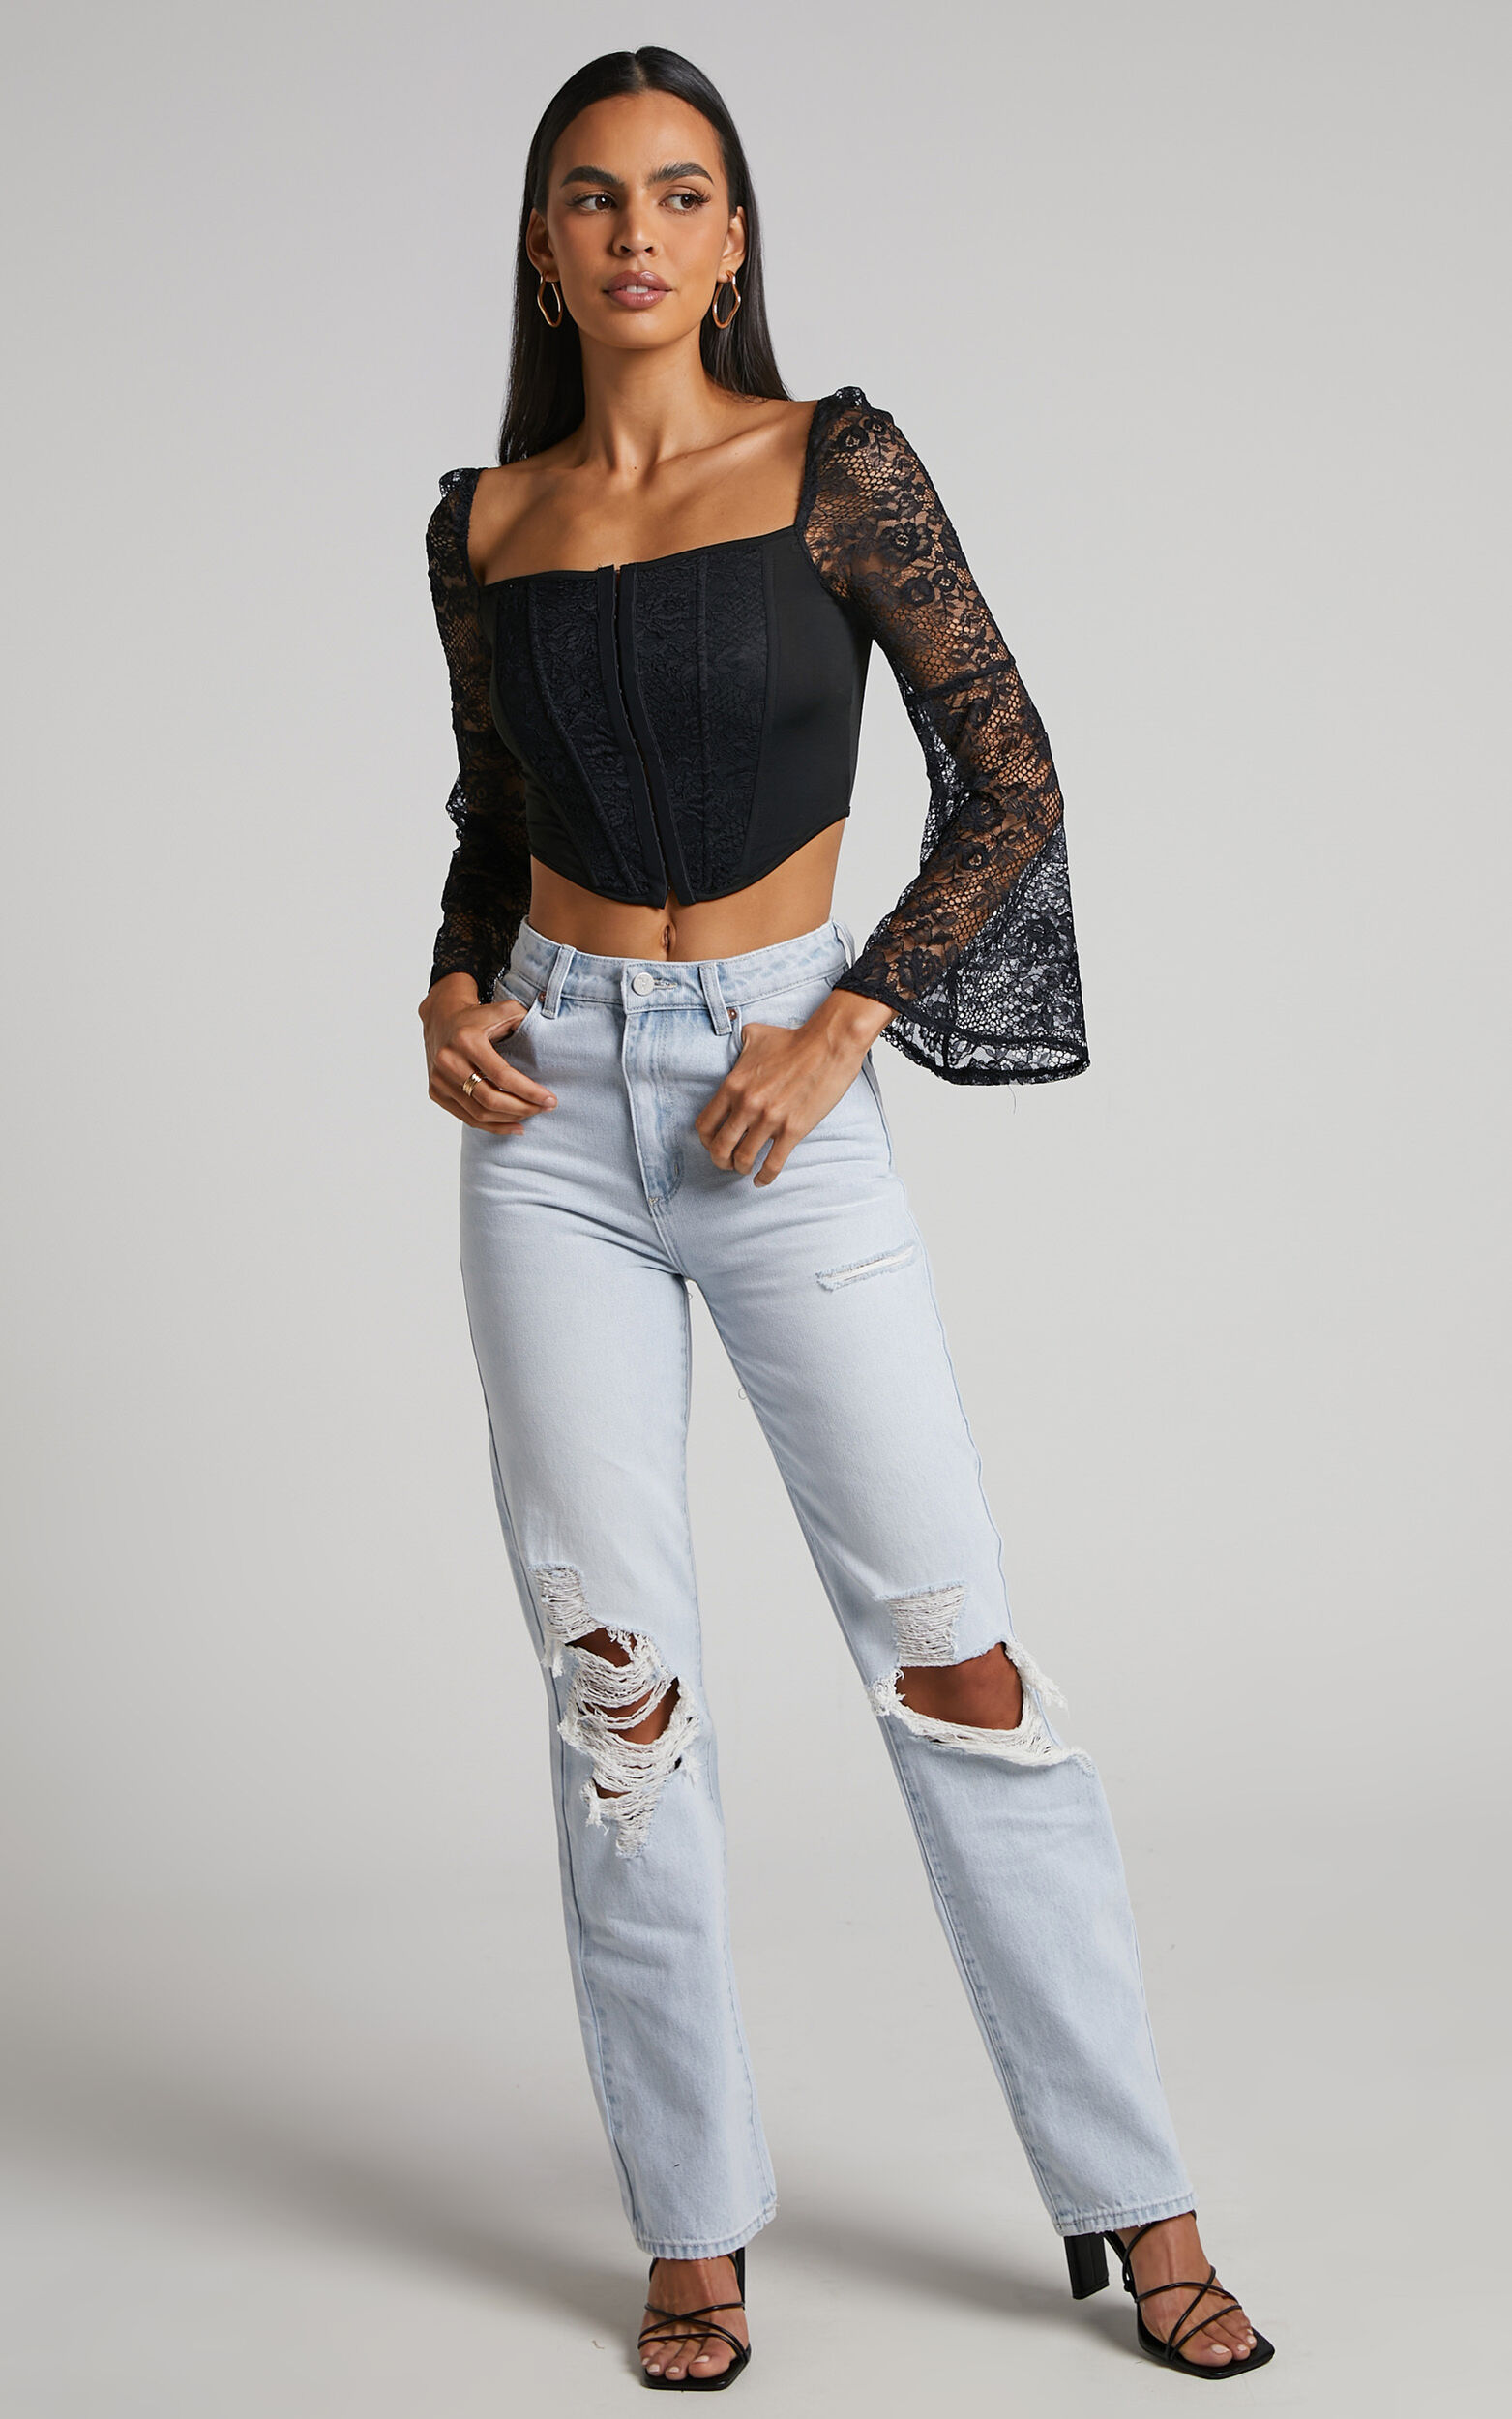 Bell sleeve lace top – Enzsnyc